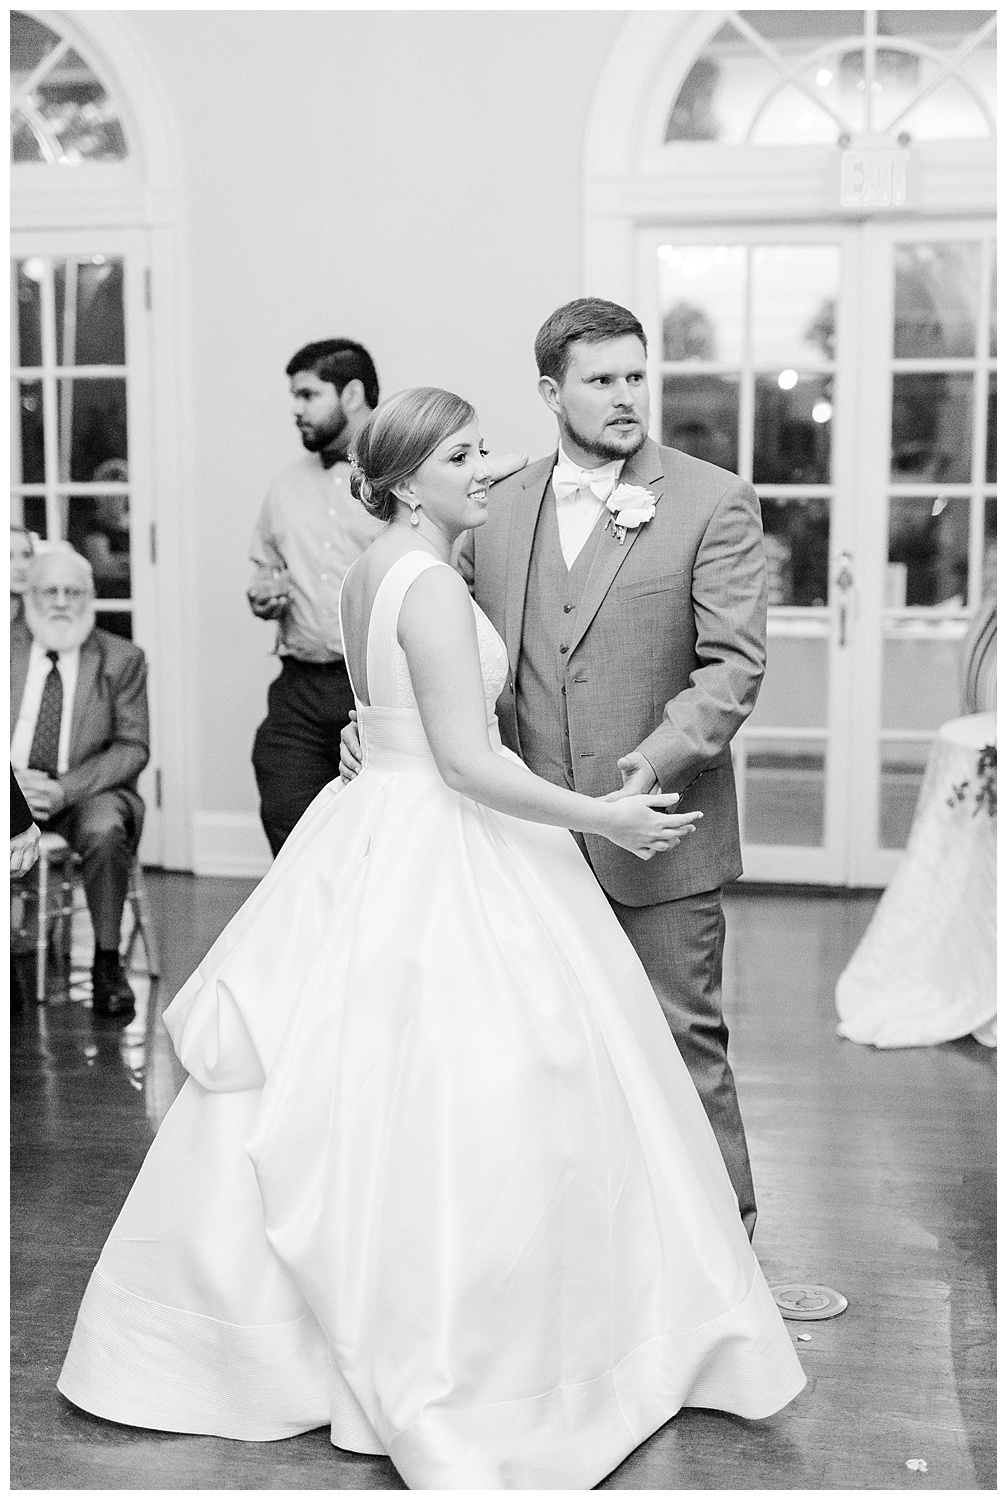 a bride and groom share a first dance at their wedding reception